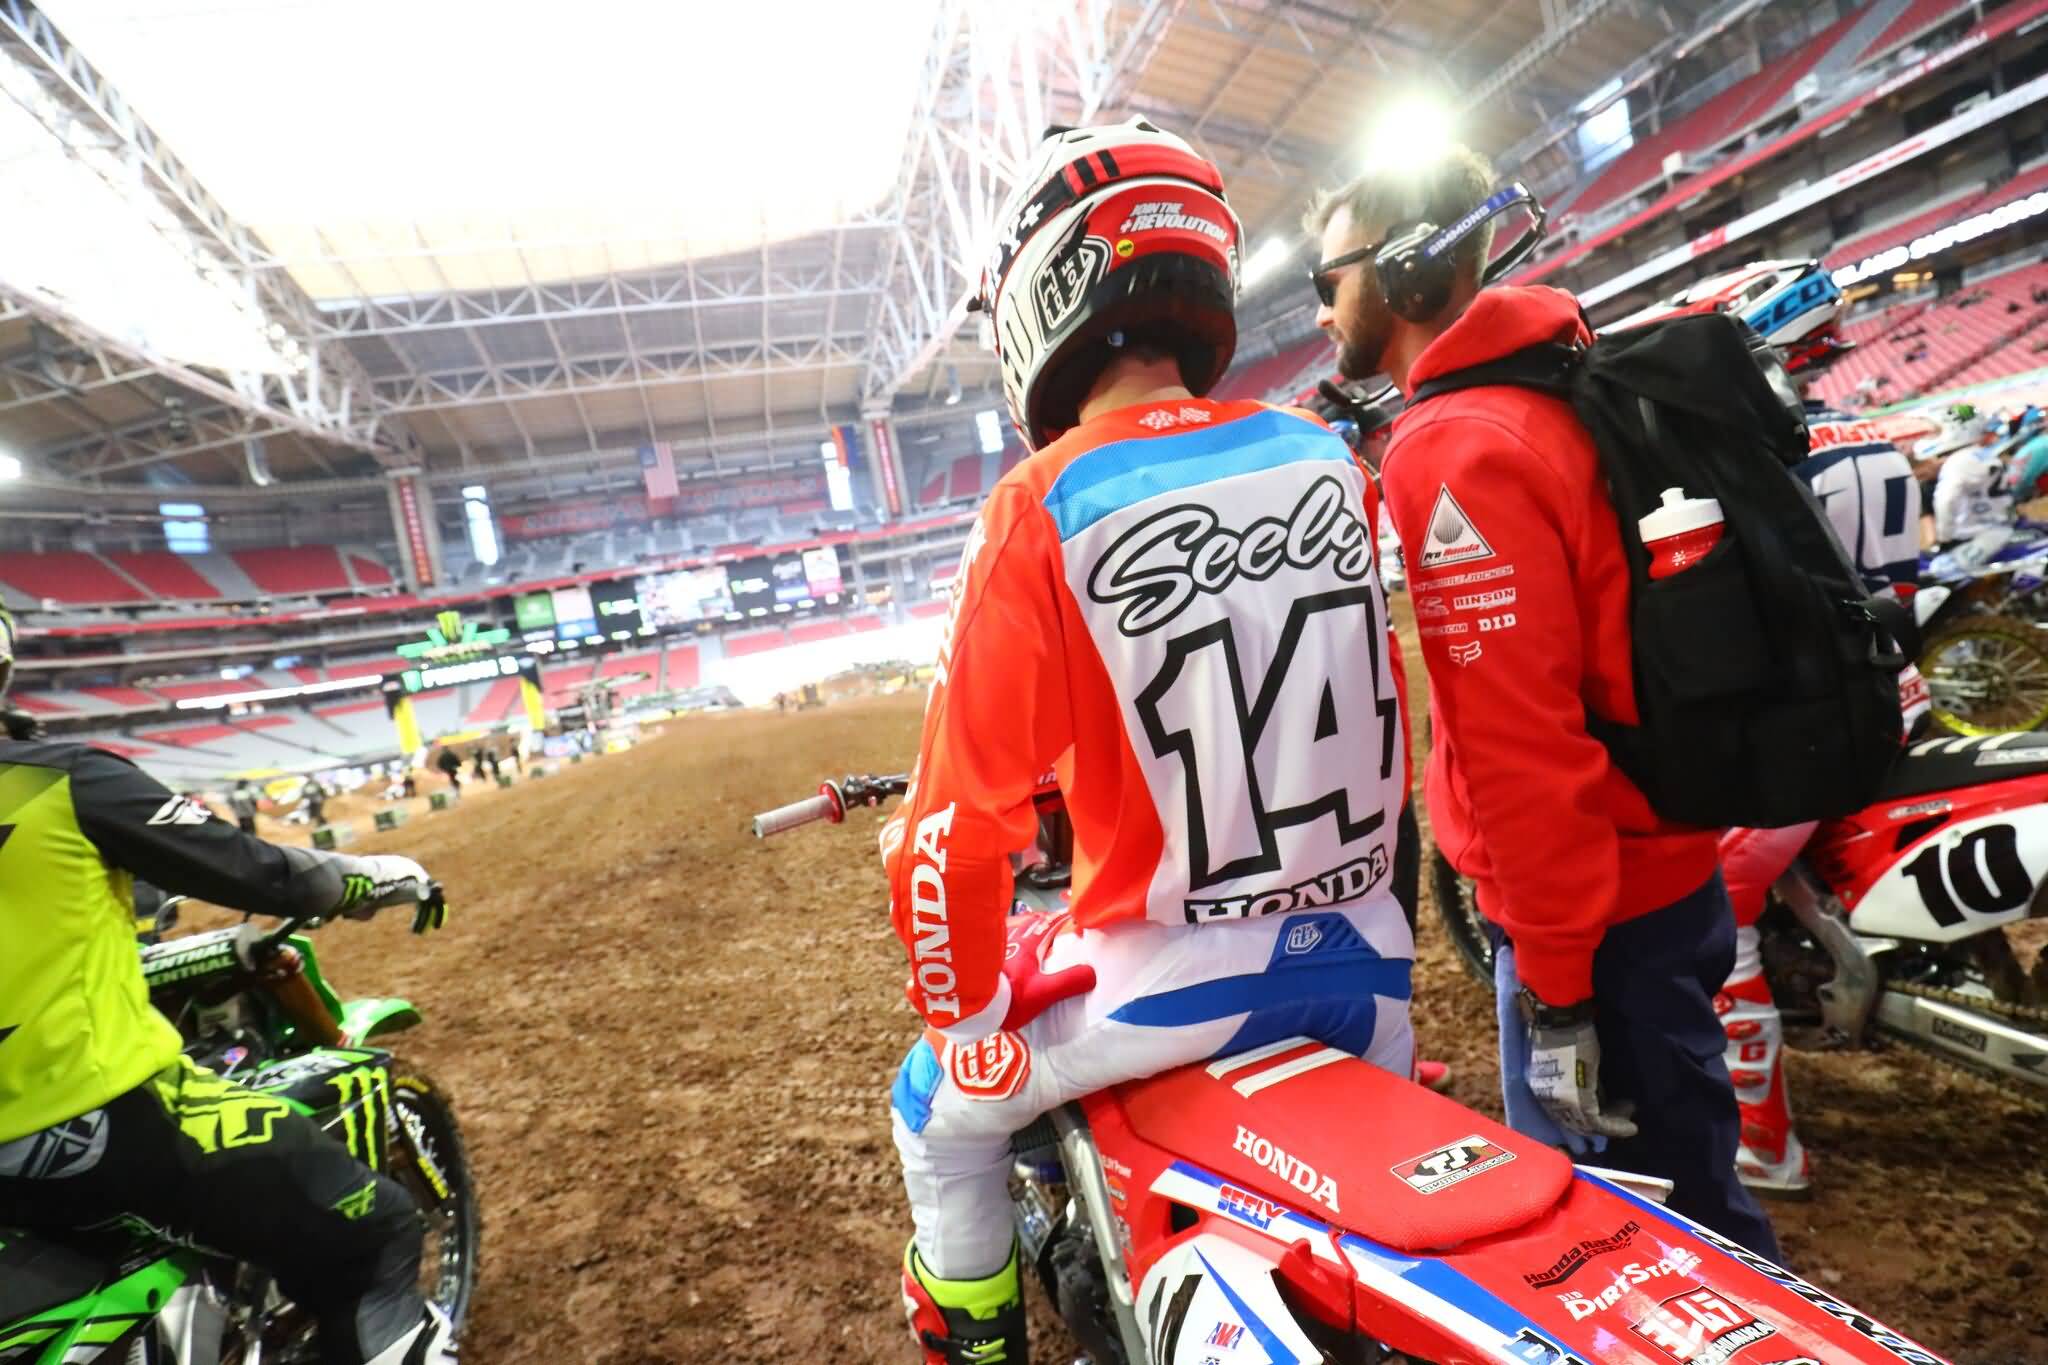 TLD’s Seely Maintains Momentum With A Fourth-Place Finish